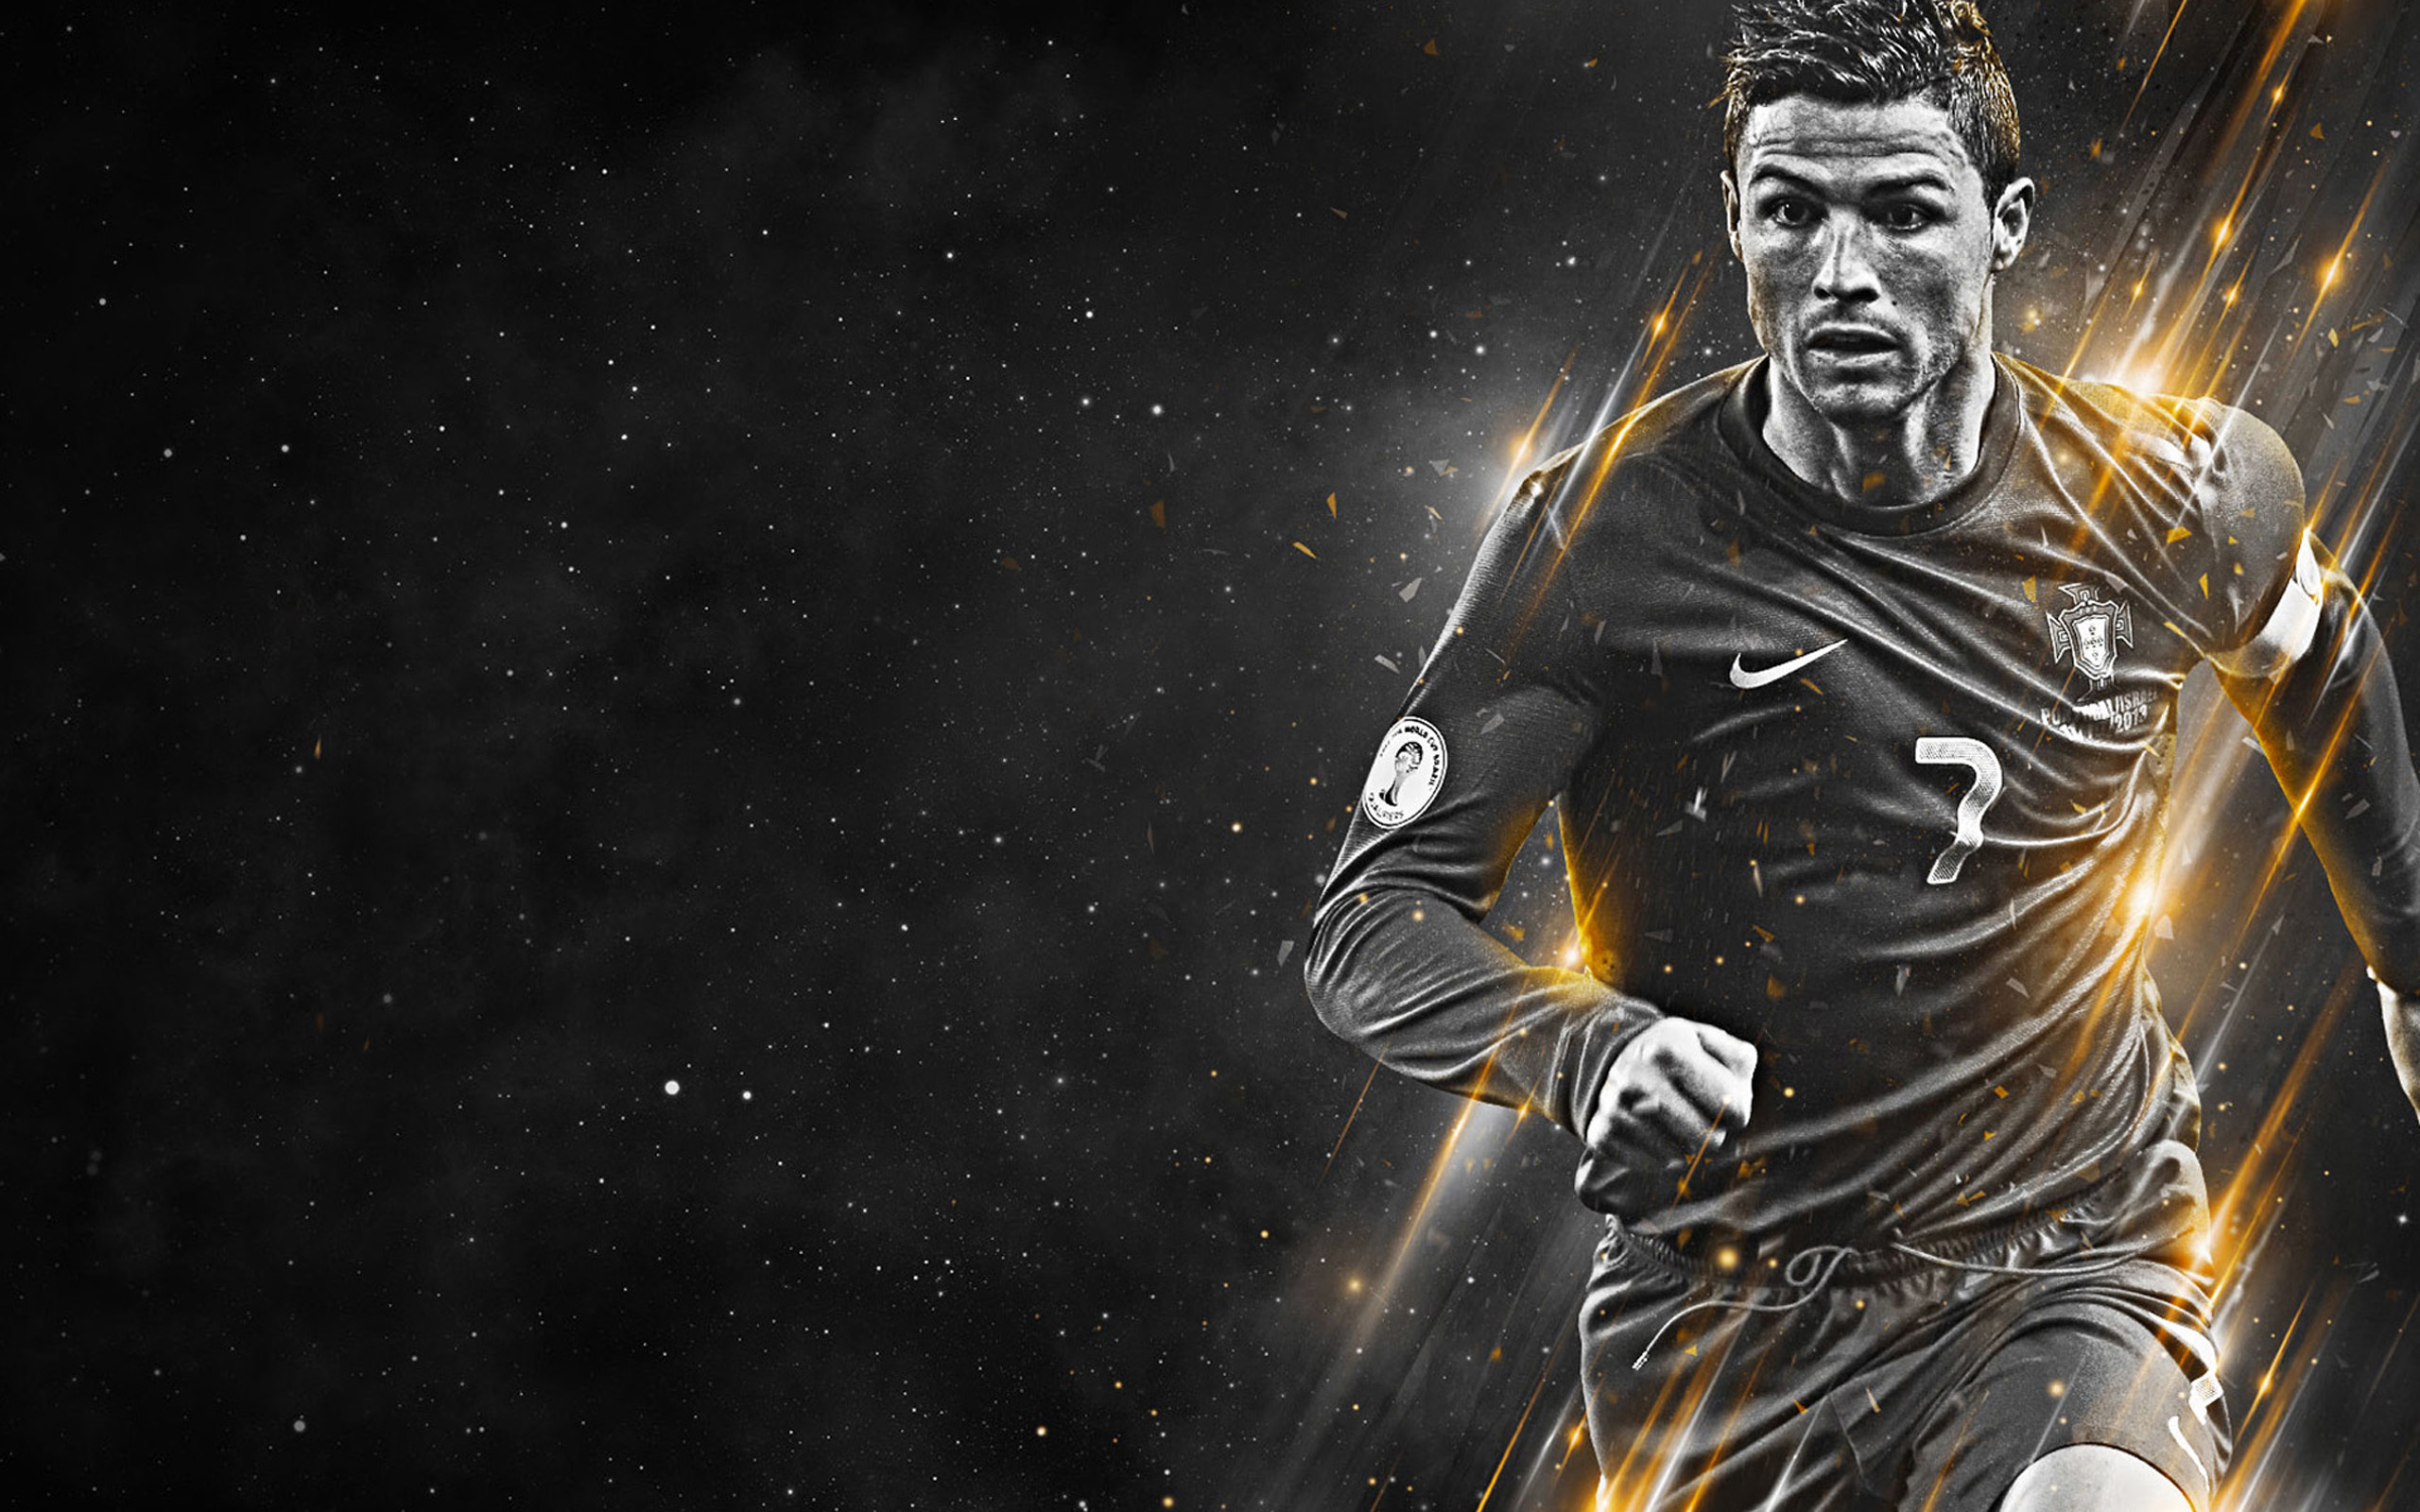 SHADIAO Cristiano Ronaldo Wallpaper Fashion Art Posters for Top Football  Players (3) Canvas Art Poster and Wall Art Picture Print Modern Family  bedroom Decor Posters 20x30inch(50x75cm) : Amazon.co.uk: Home & Kitchen